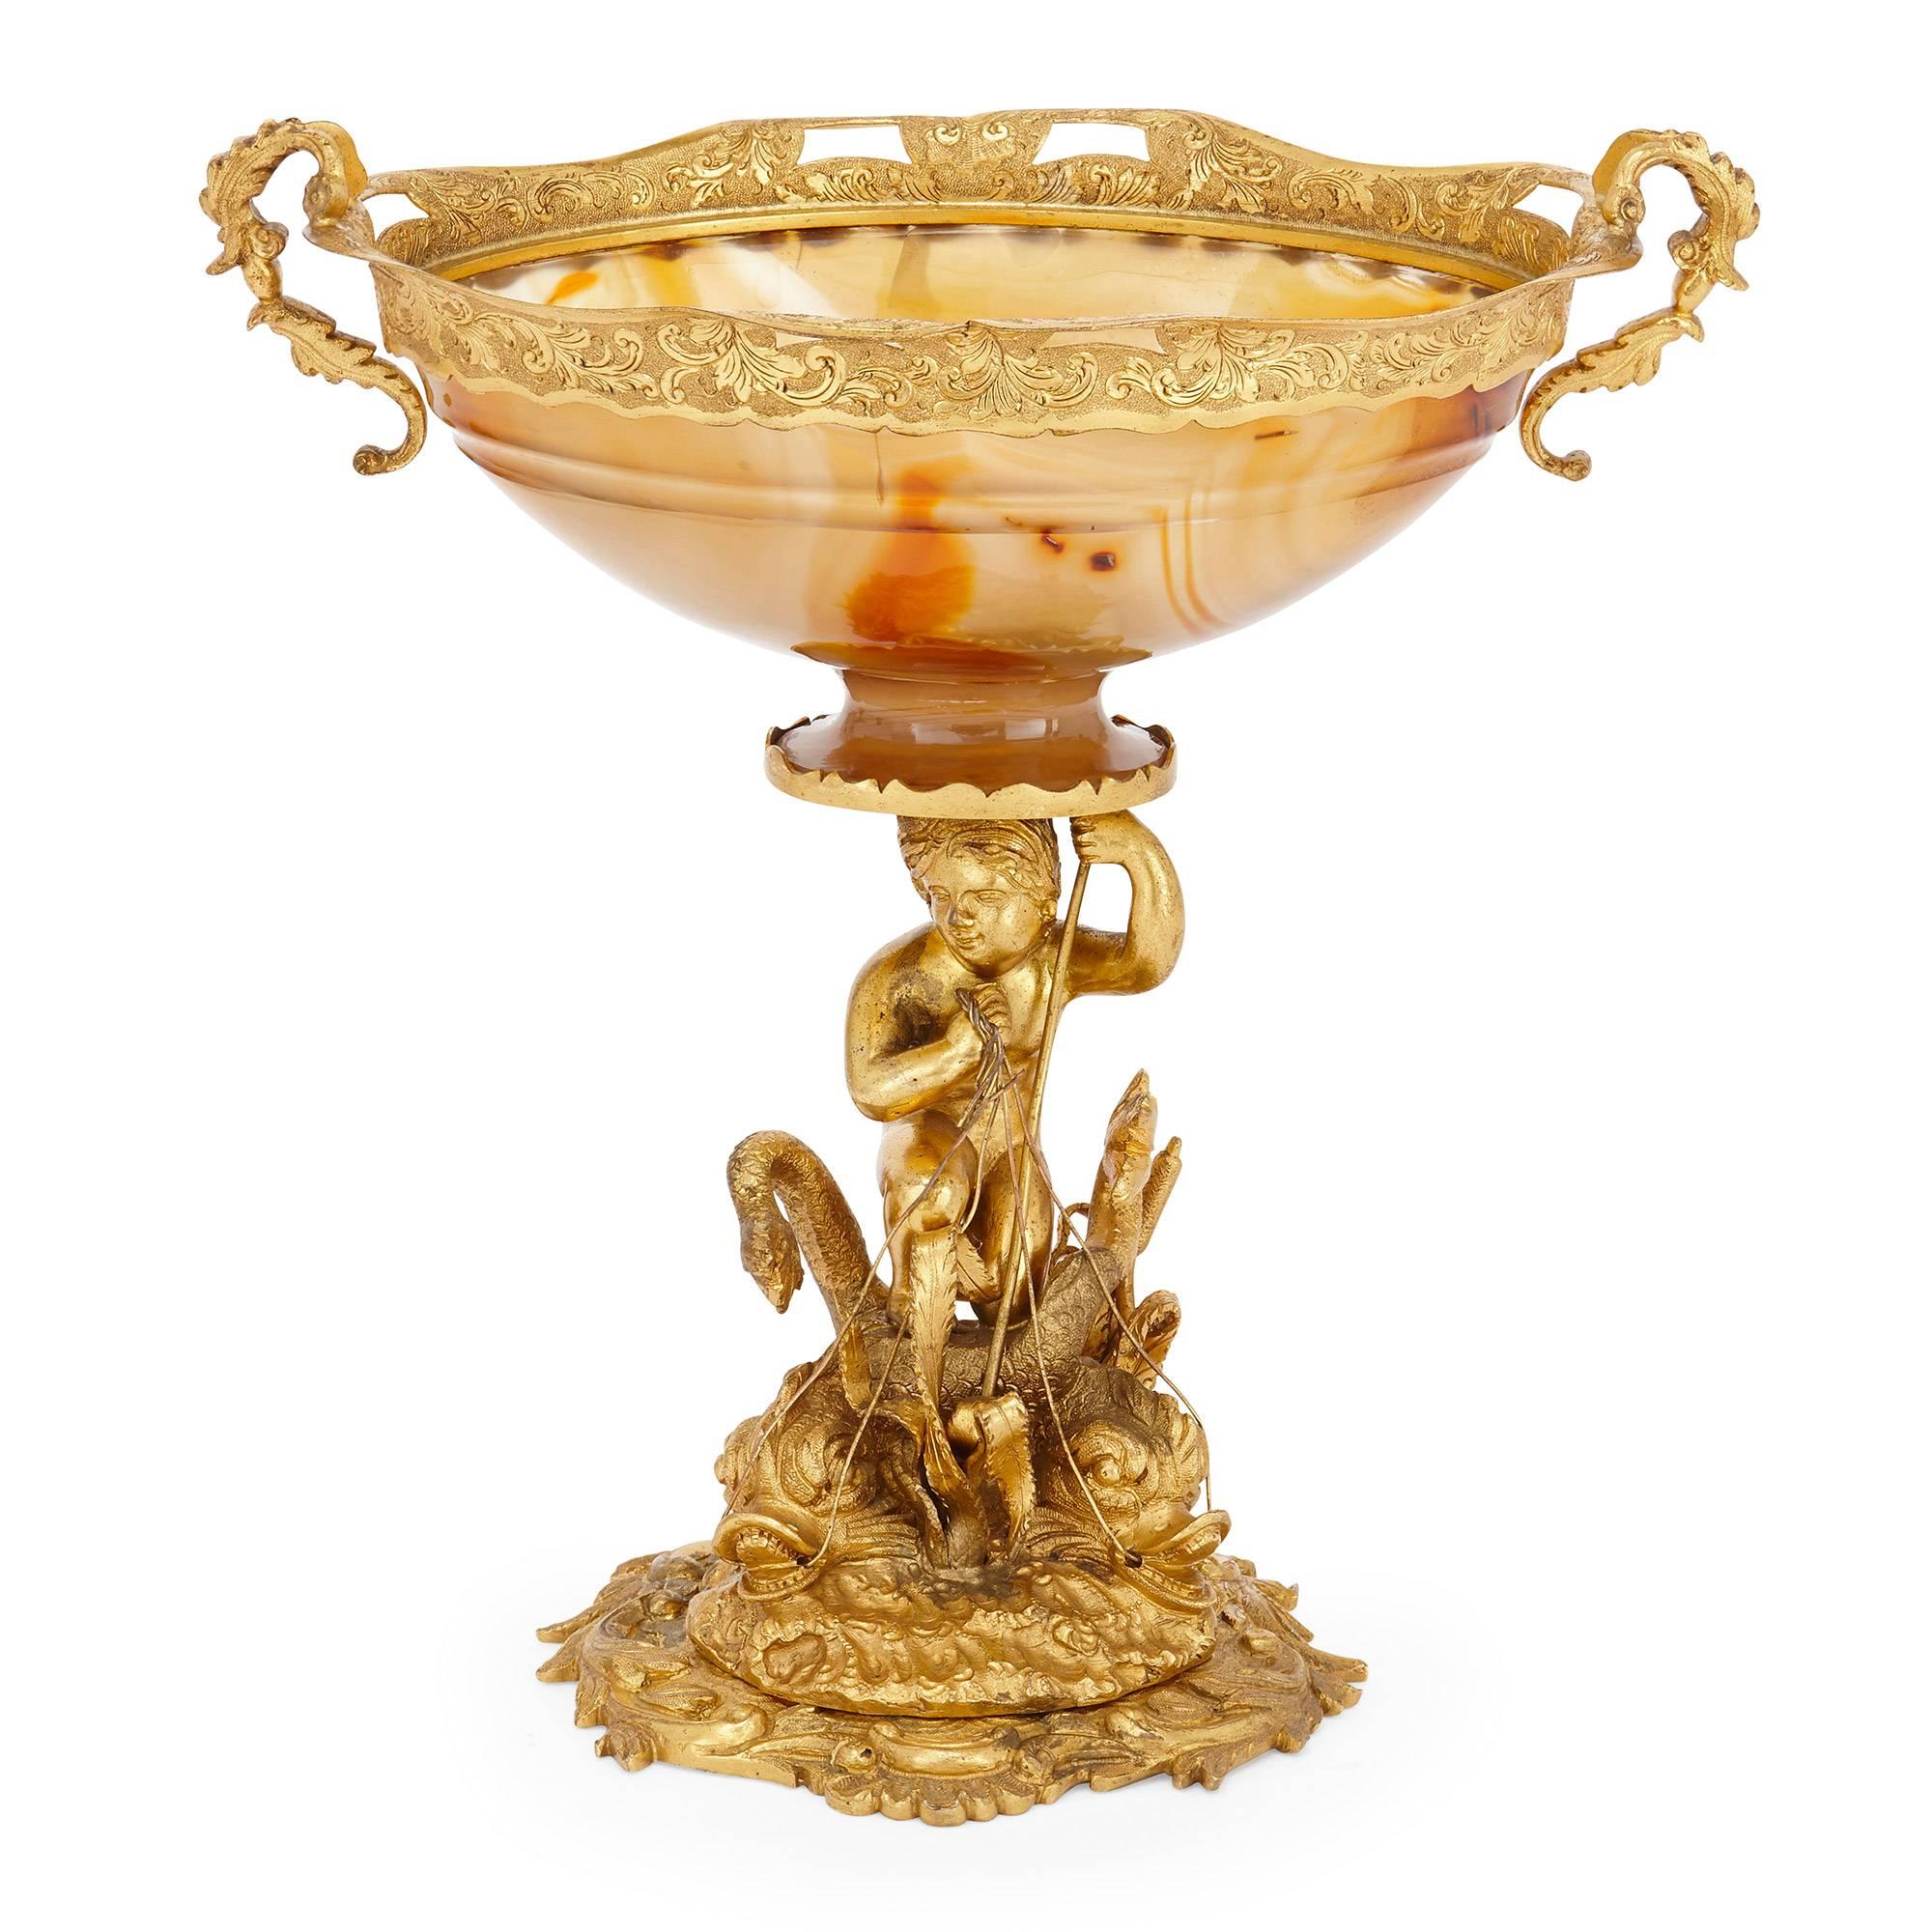 This fine ormolu centrepiece is modeled as a young boy standing on sea creatures from classical mythology, all set on a naturalistic base. A bowl made from agate, the orange and yellow coloured crystalline rock material, sits on top of the base and